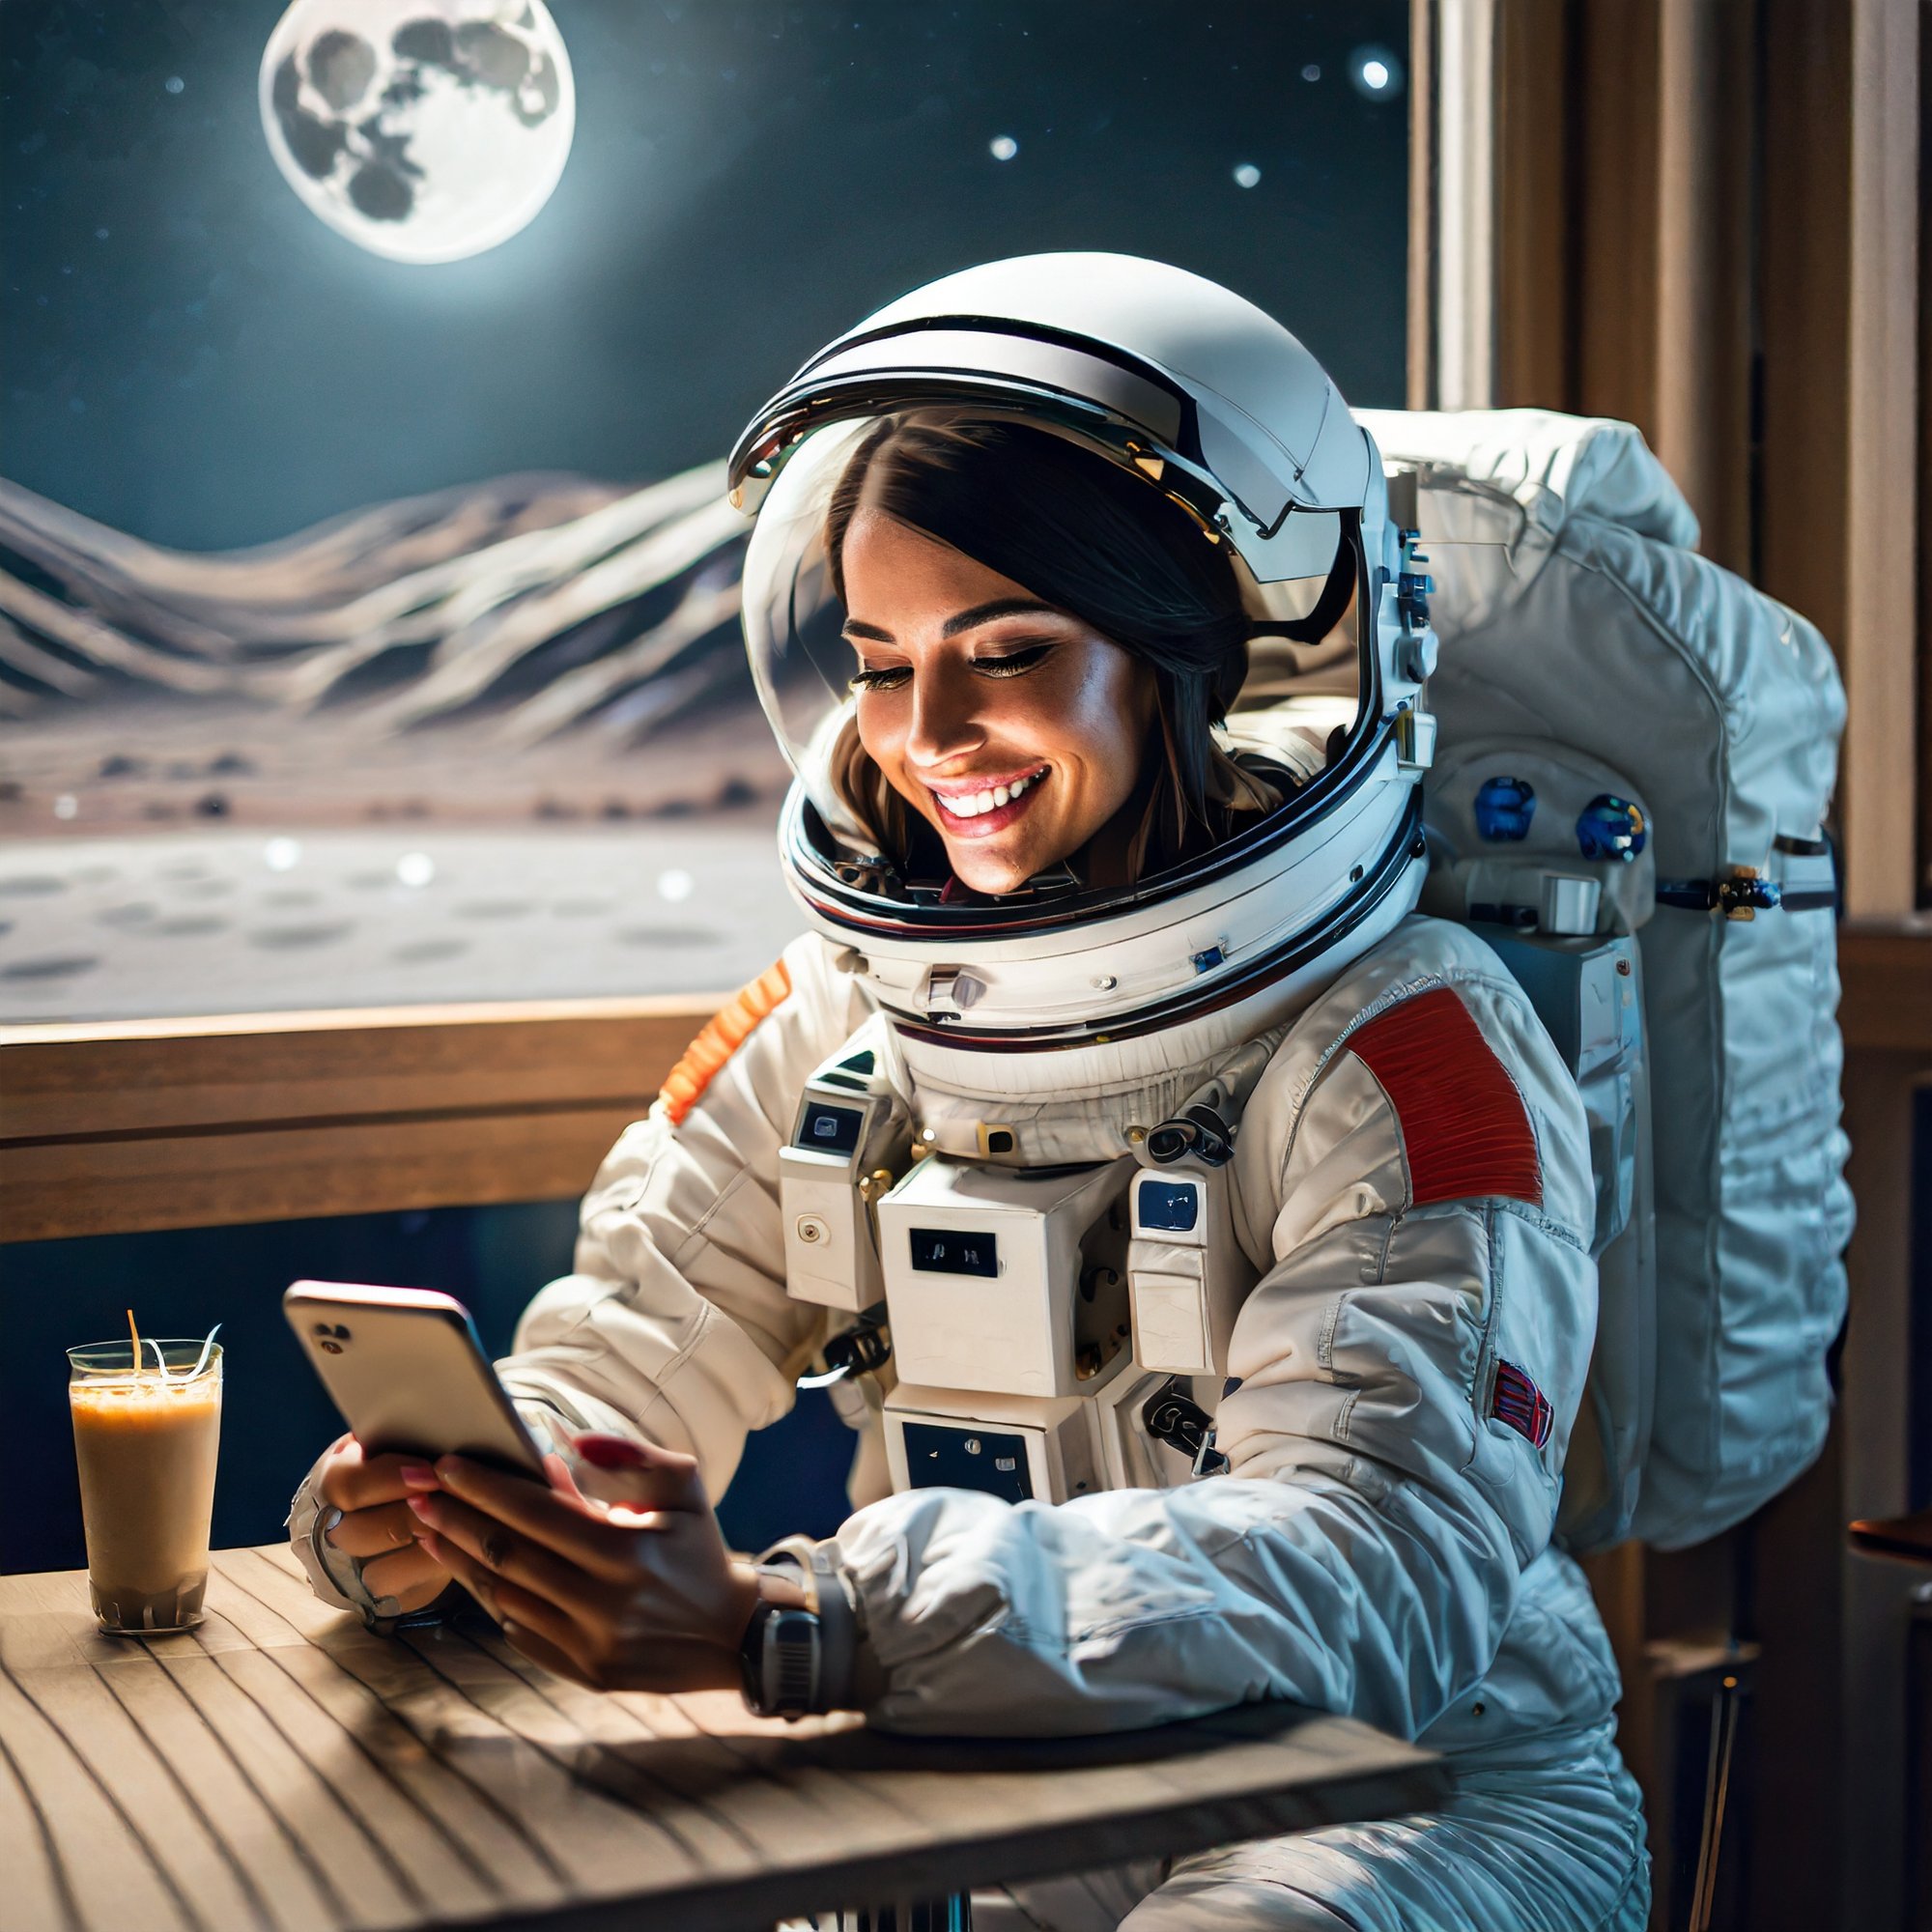 Firefly A female astronaut using a smartphone and smiling, sat in a cafeteria in Moon; lunar landsca